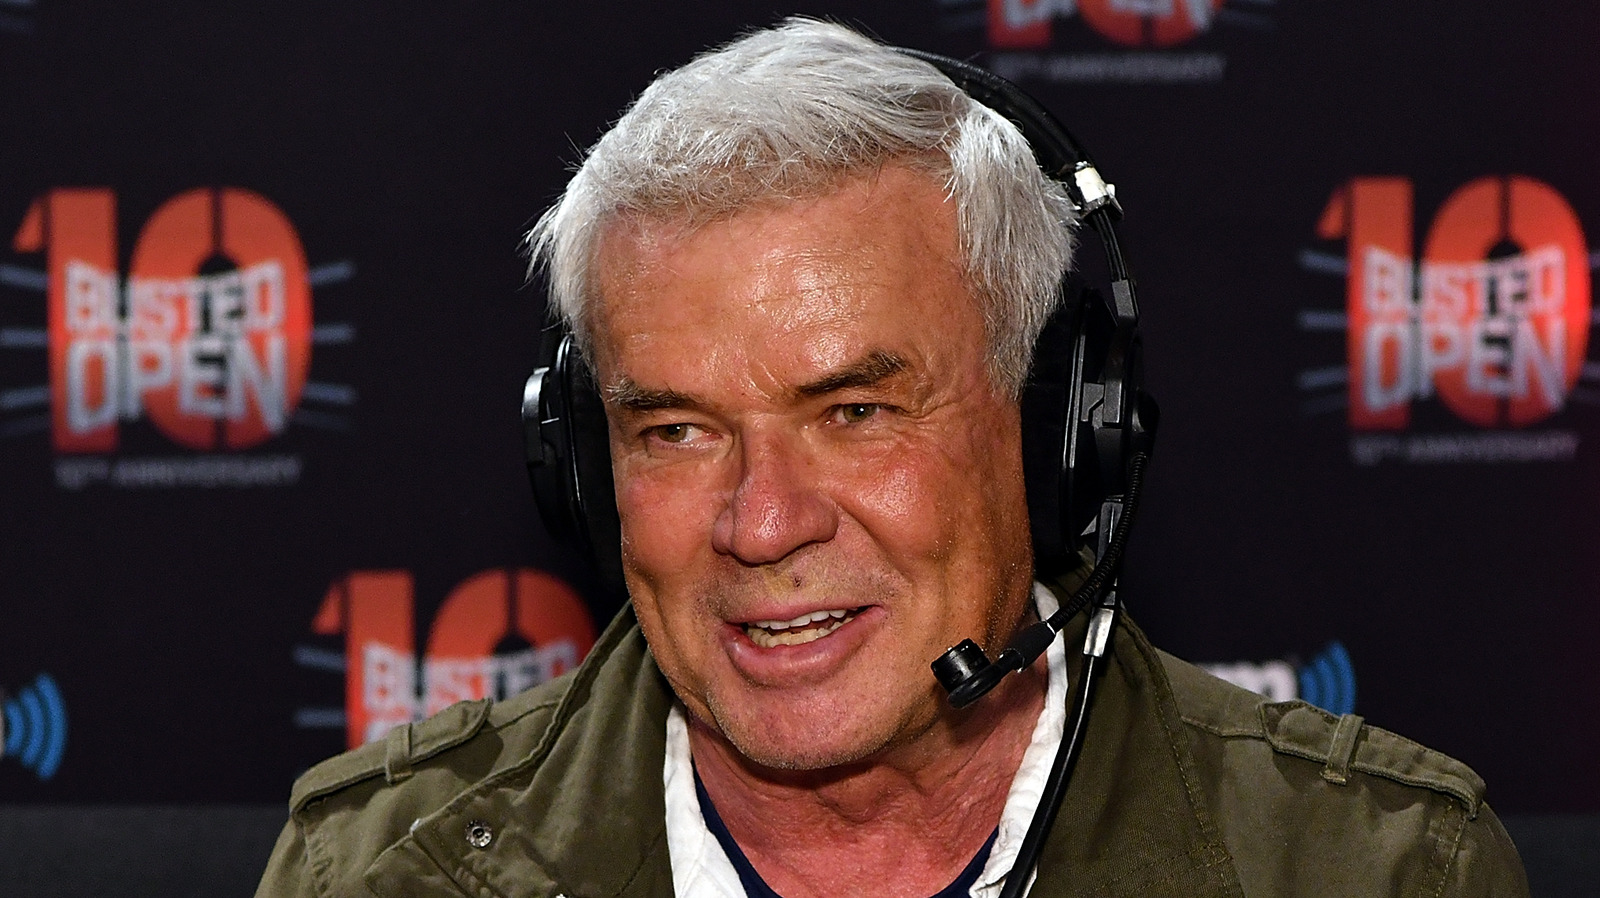 WWE Hall Of Famer Eric Bischoff Reflects On 'ATM Eric' Nickname From WCW Tenure